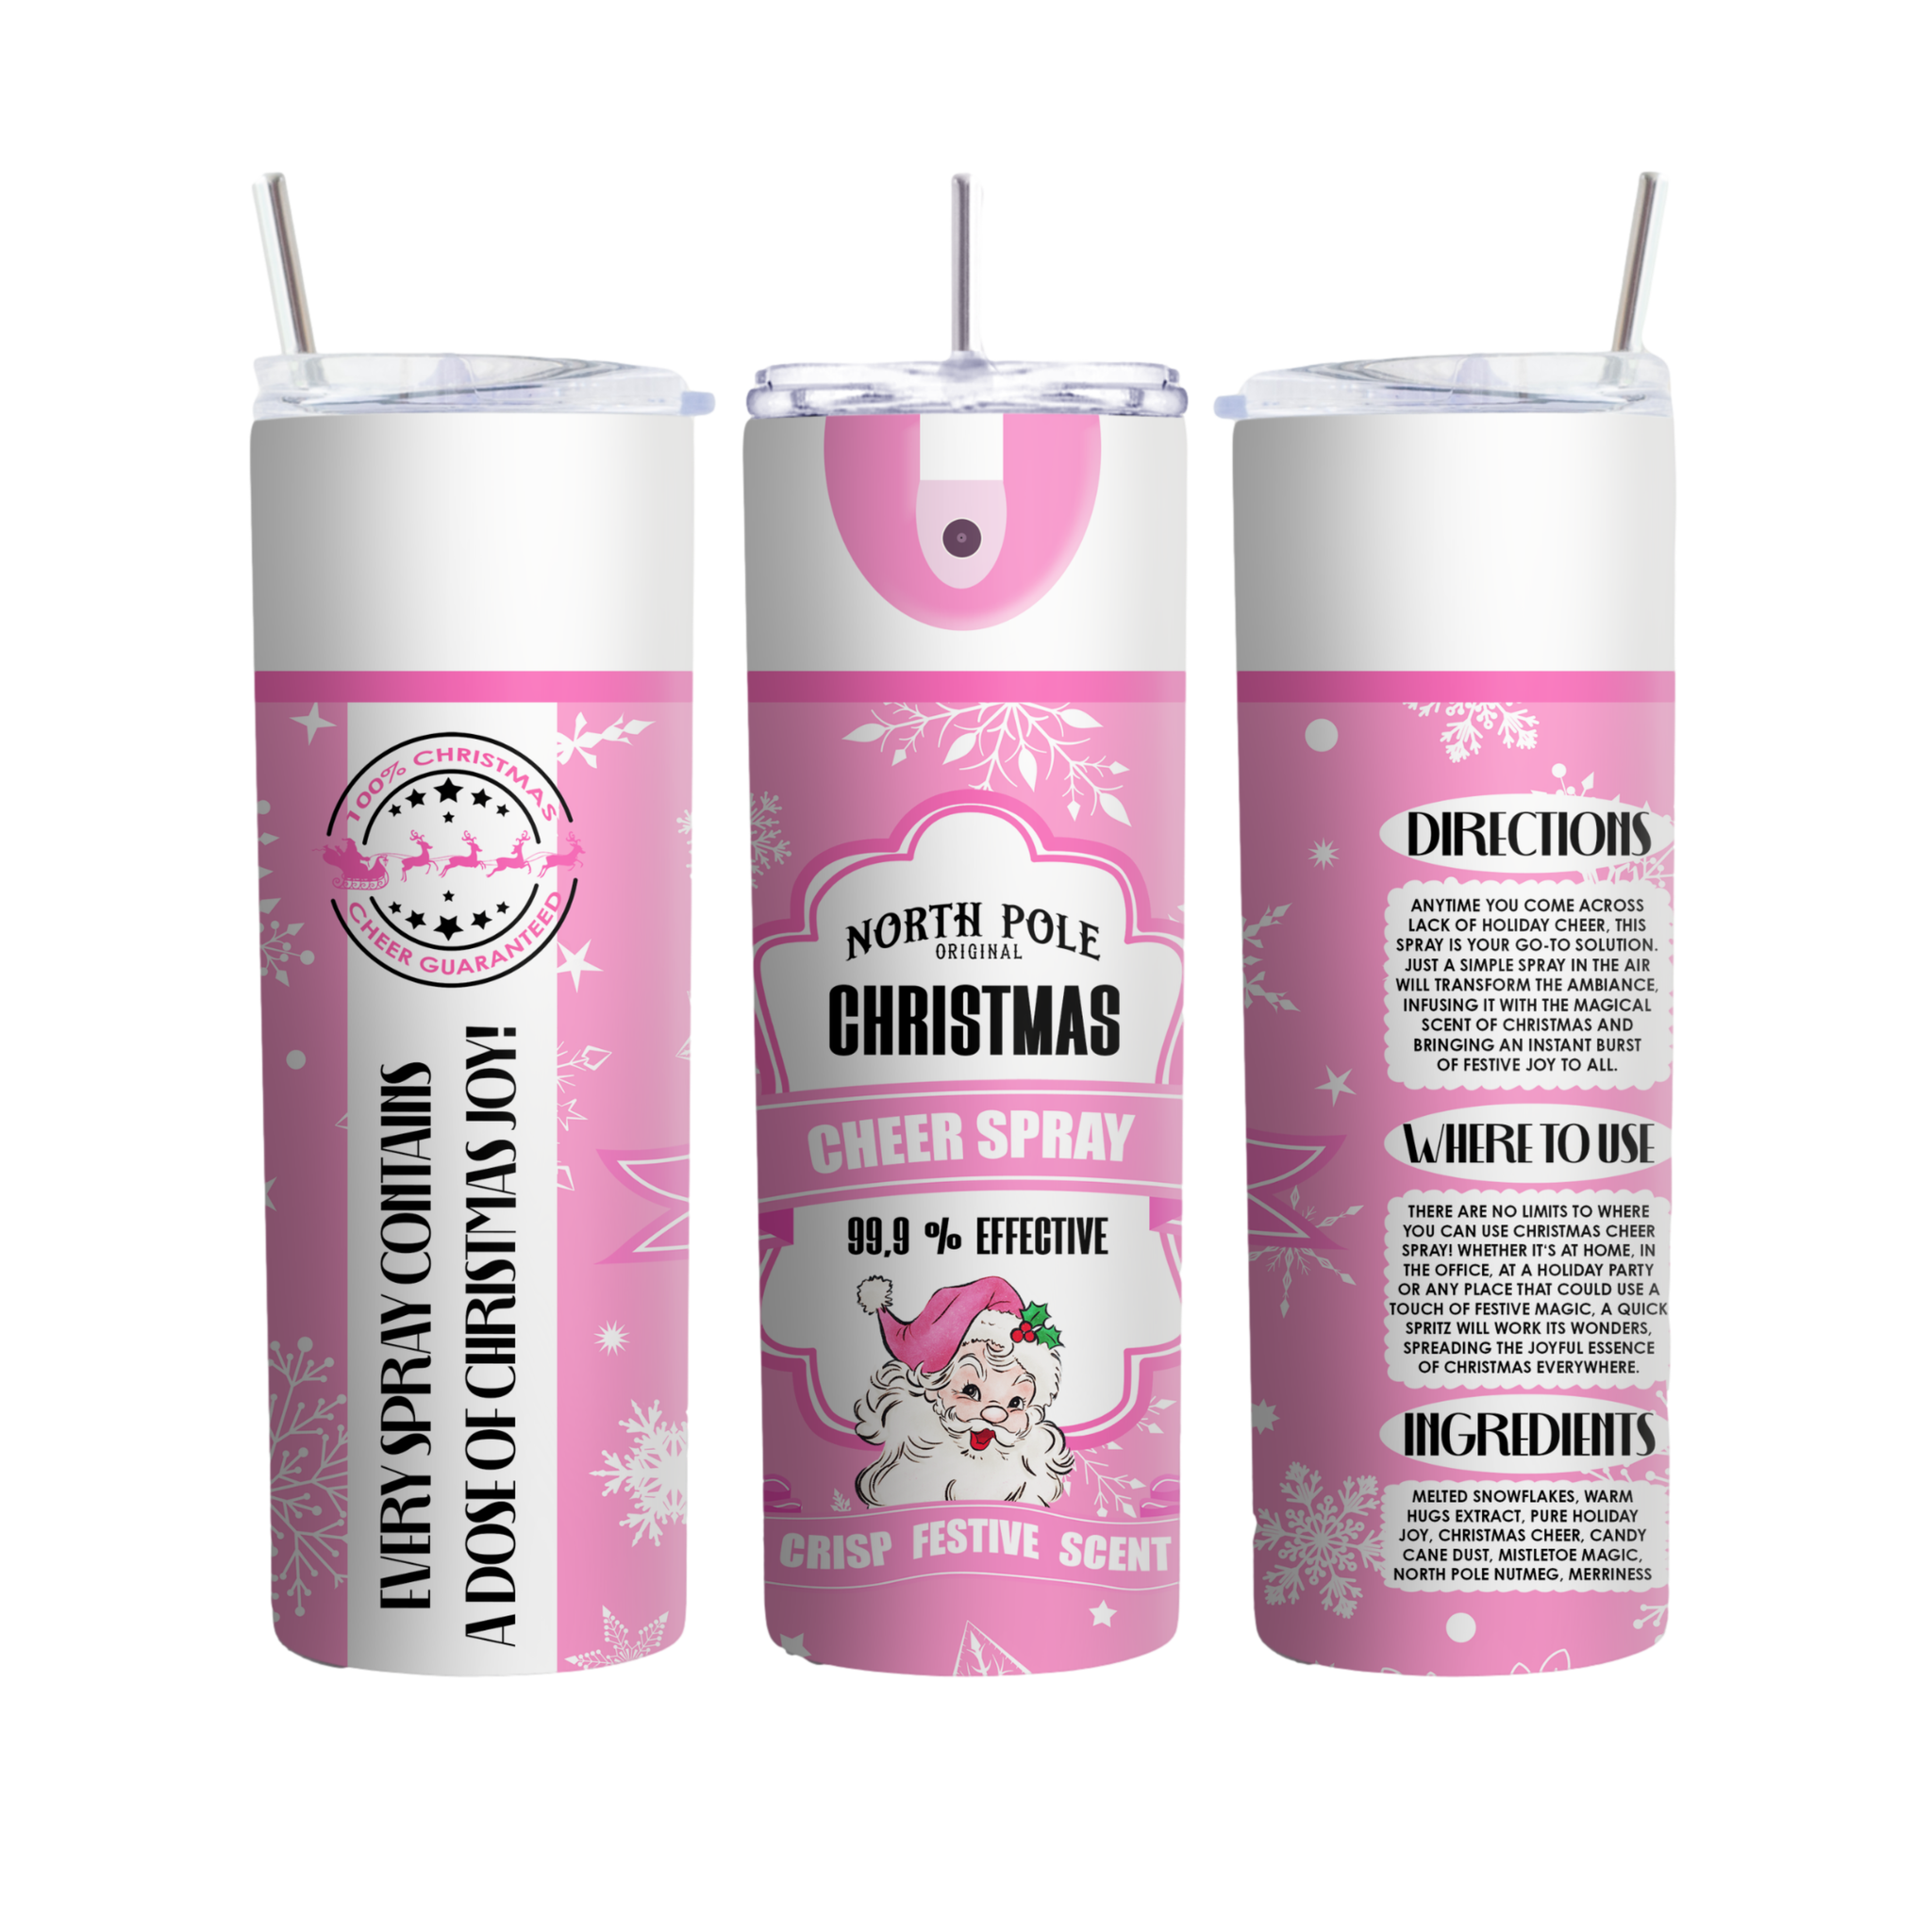 Inspire Me Positive Pink North Pole Christmas Cheer 20oz Tumbler, Festive Spray Can Style Holiday Cup, Ideal for Seasonal Celebrations